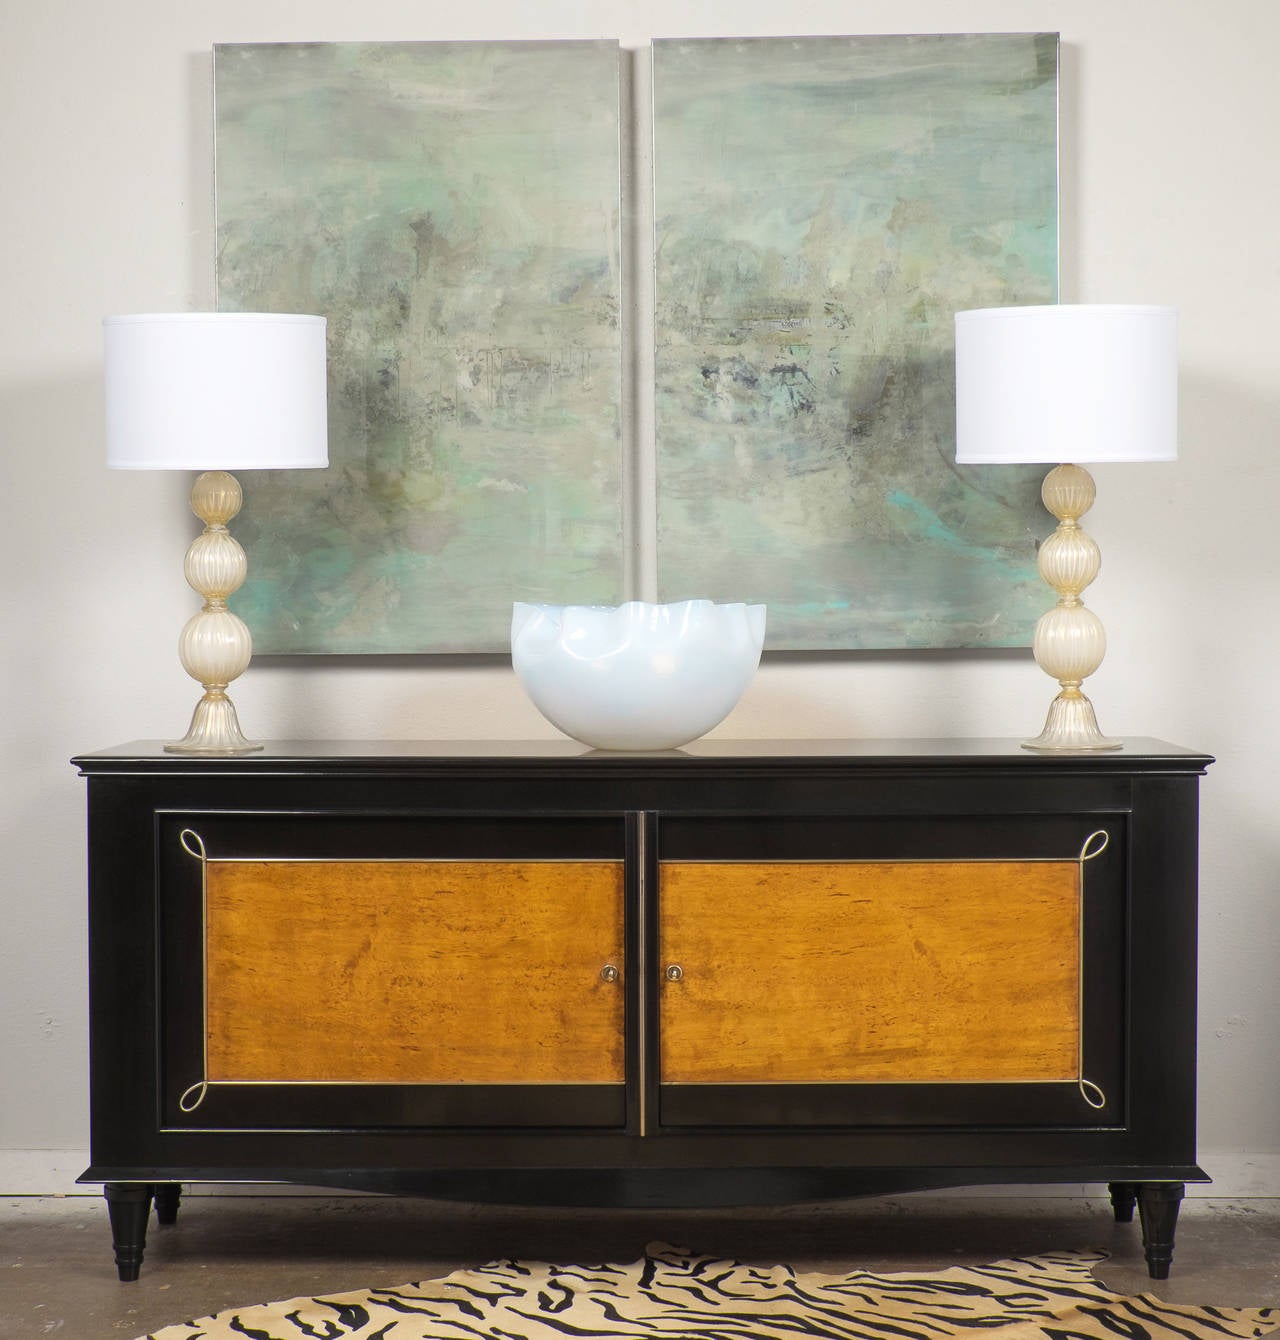 We couldn't resist the strong decorative impact for this gorgeous buffet in the manner of René Drouet. The burled ash doors finely trimmed with brass and the high luster French polish really make this piece a real stunner.